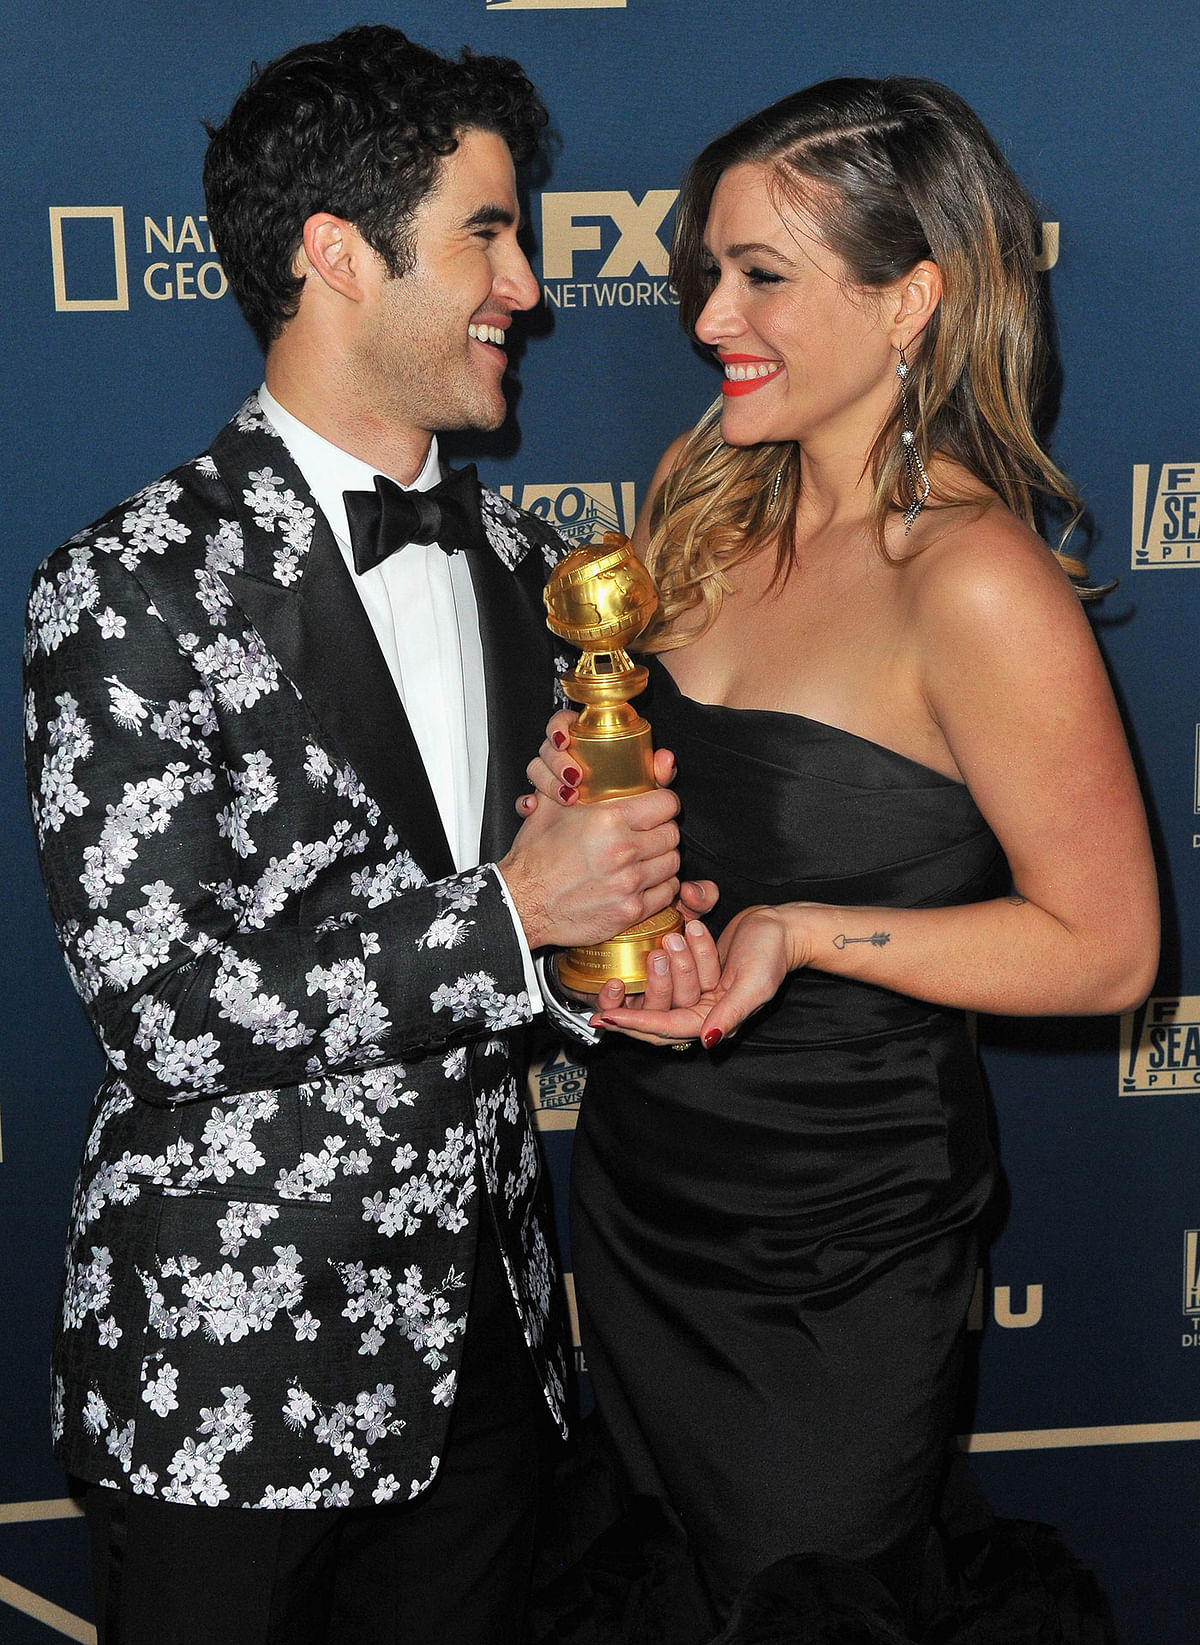 Darren Criss (L), winner of Best Performance by an Actor in a Limited Series or Motion Picture Made for Television, and Mia Swier attend the FOX, FX And Hulu 2019 Golden Globe Awards After Party at The Beverly Hilton Hotel on 6 January 2019 in Beverly Hills, California. Photo: AFP